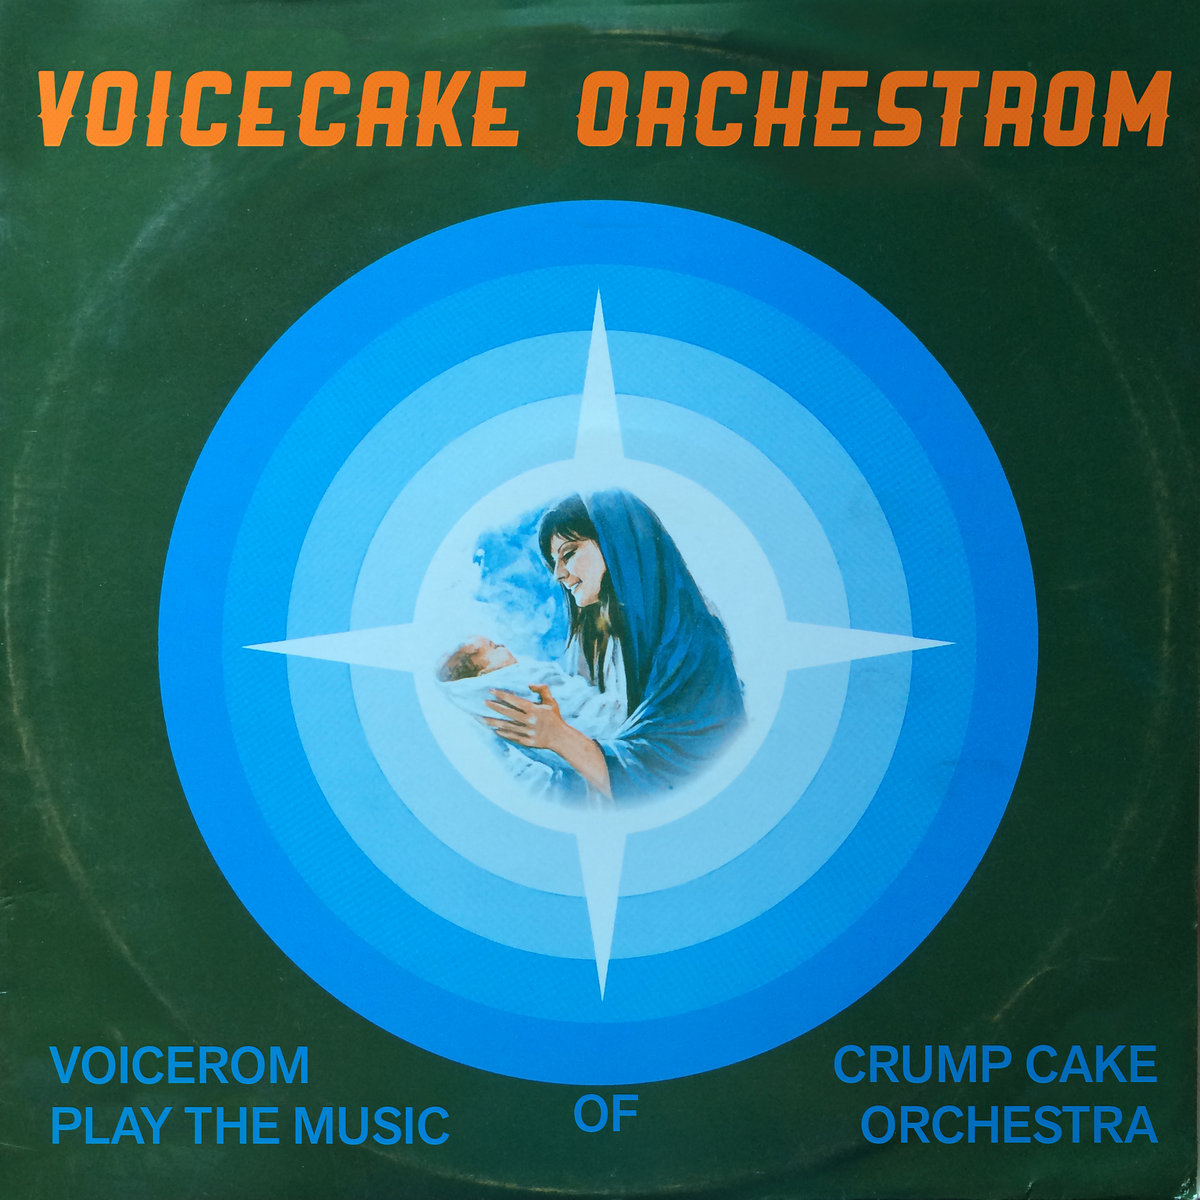 voiceROM - "Voicecake Orchestrom" [Recorded, Mixed & Mastered (JP)]